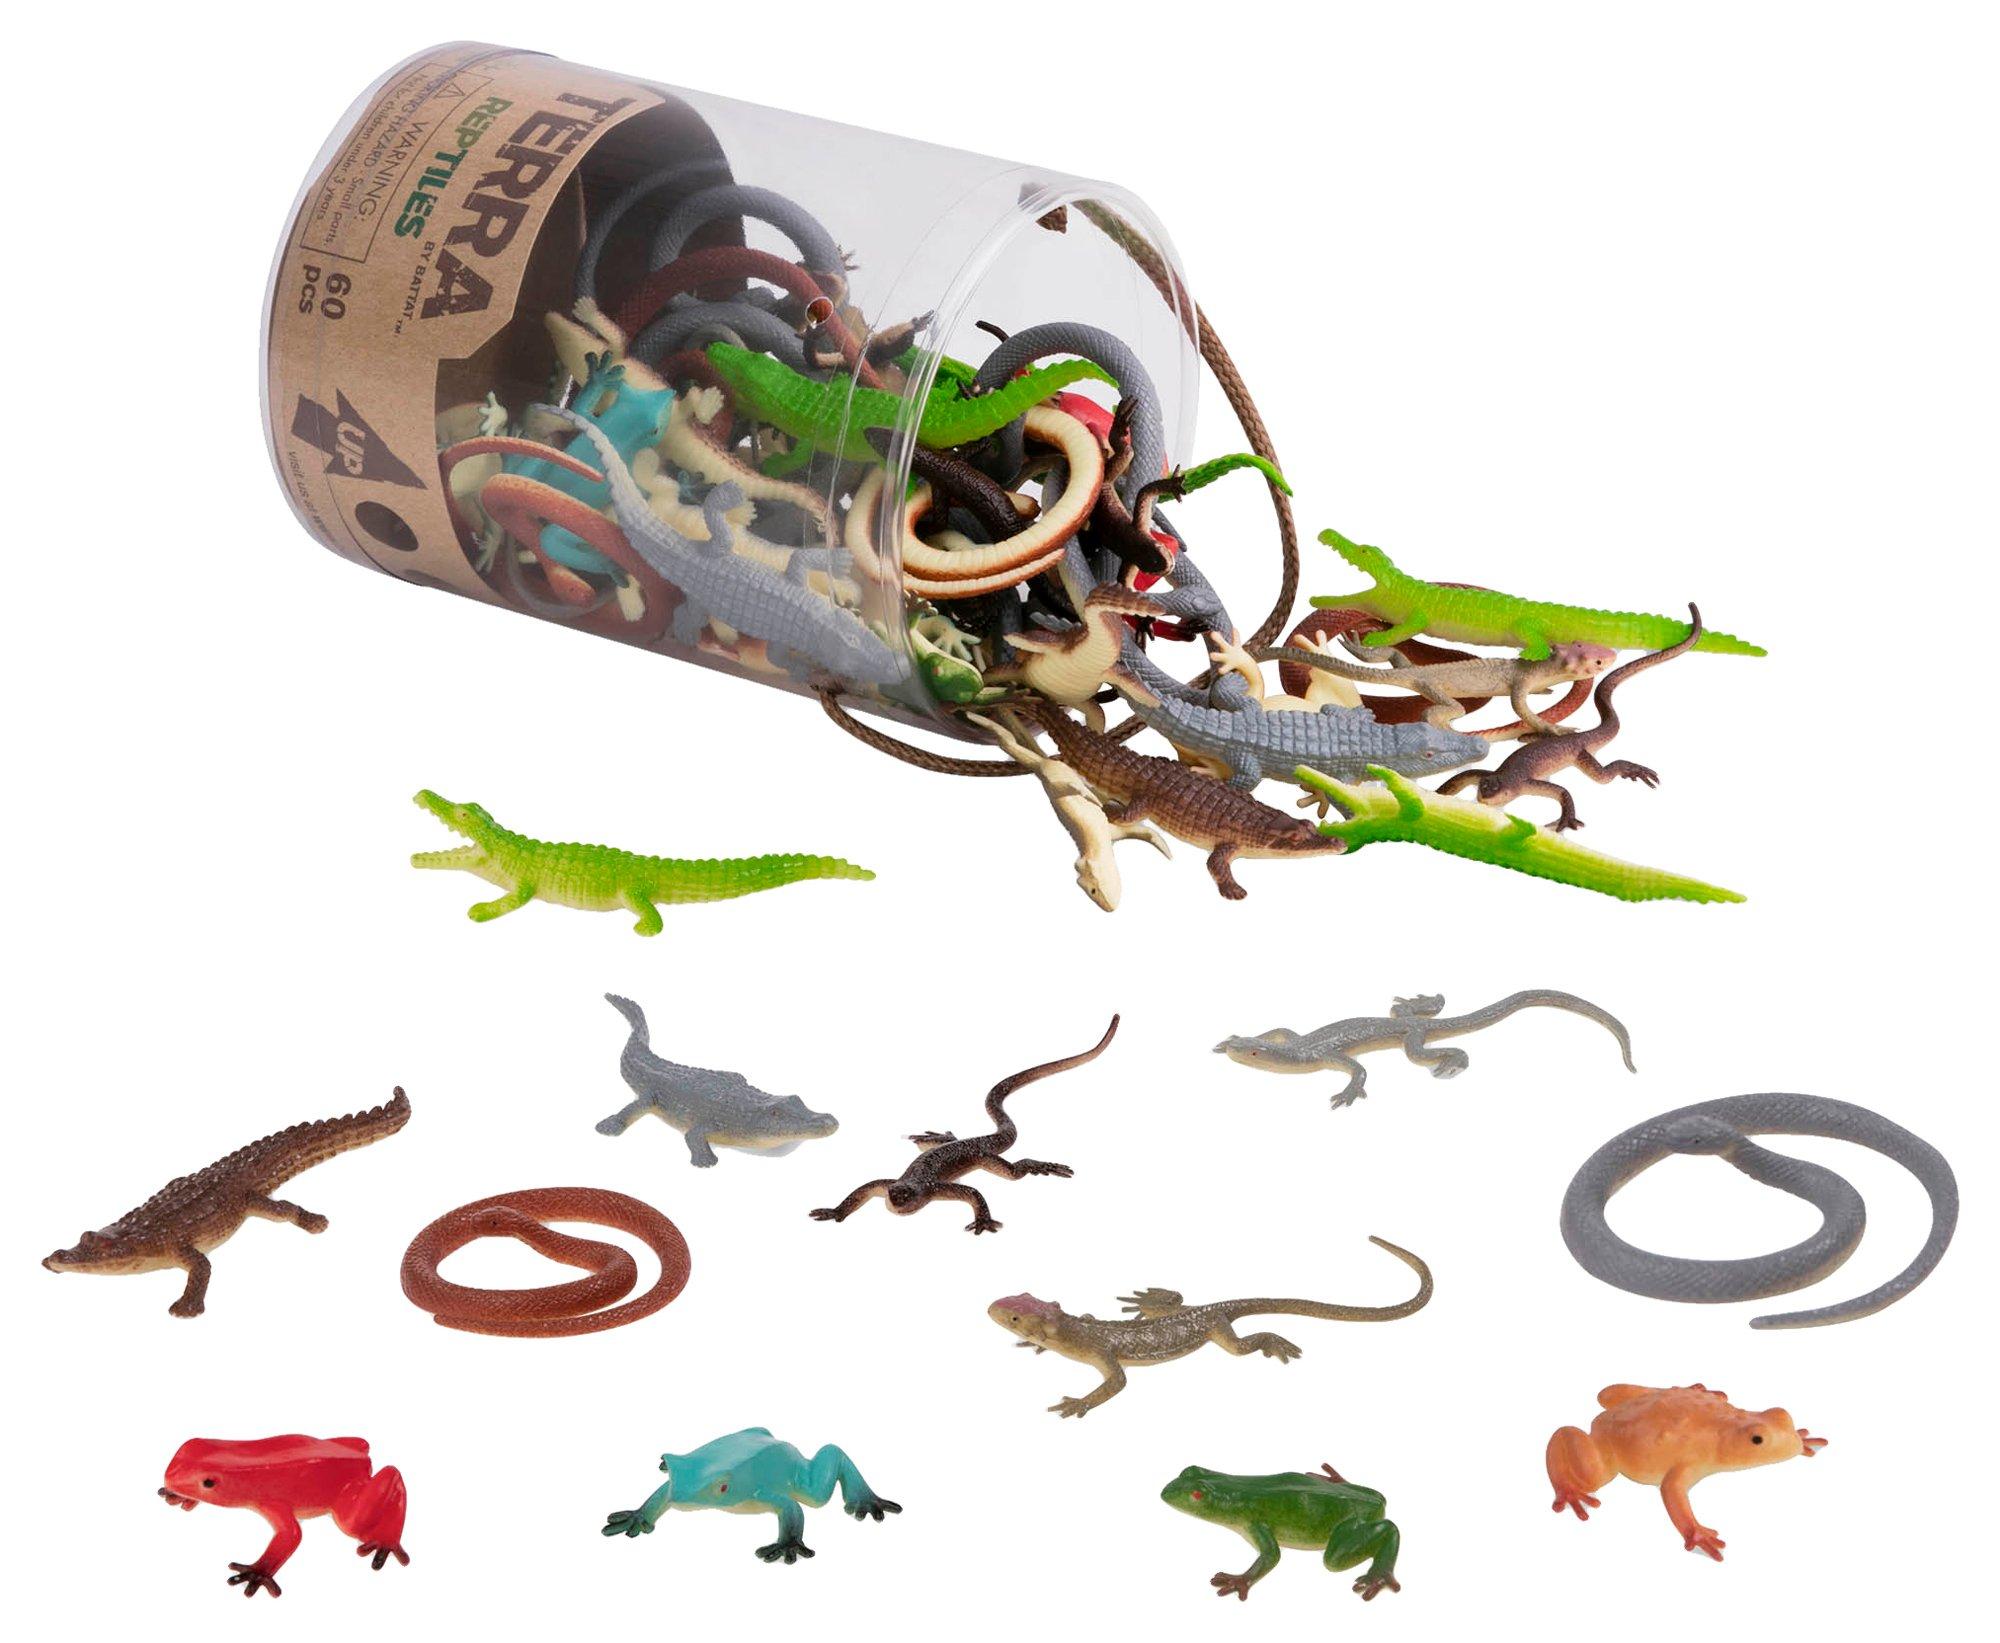 TERRA BY BATTAT 60, 2 Inches Reptiles In Tube Toy Set